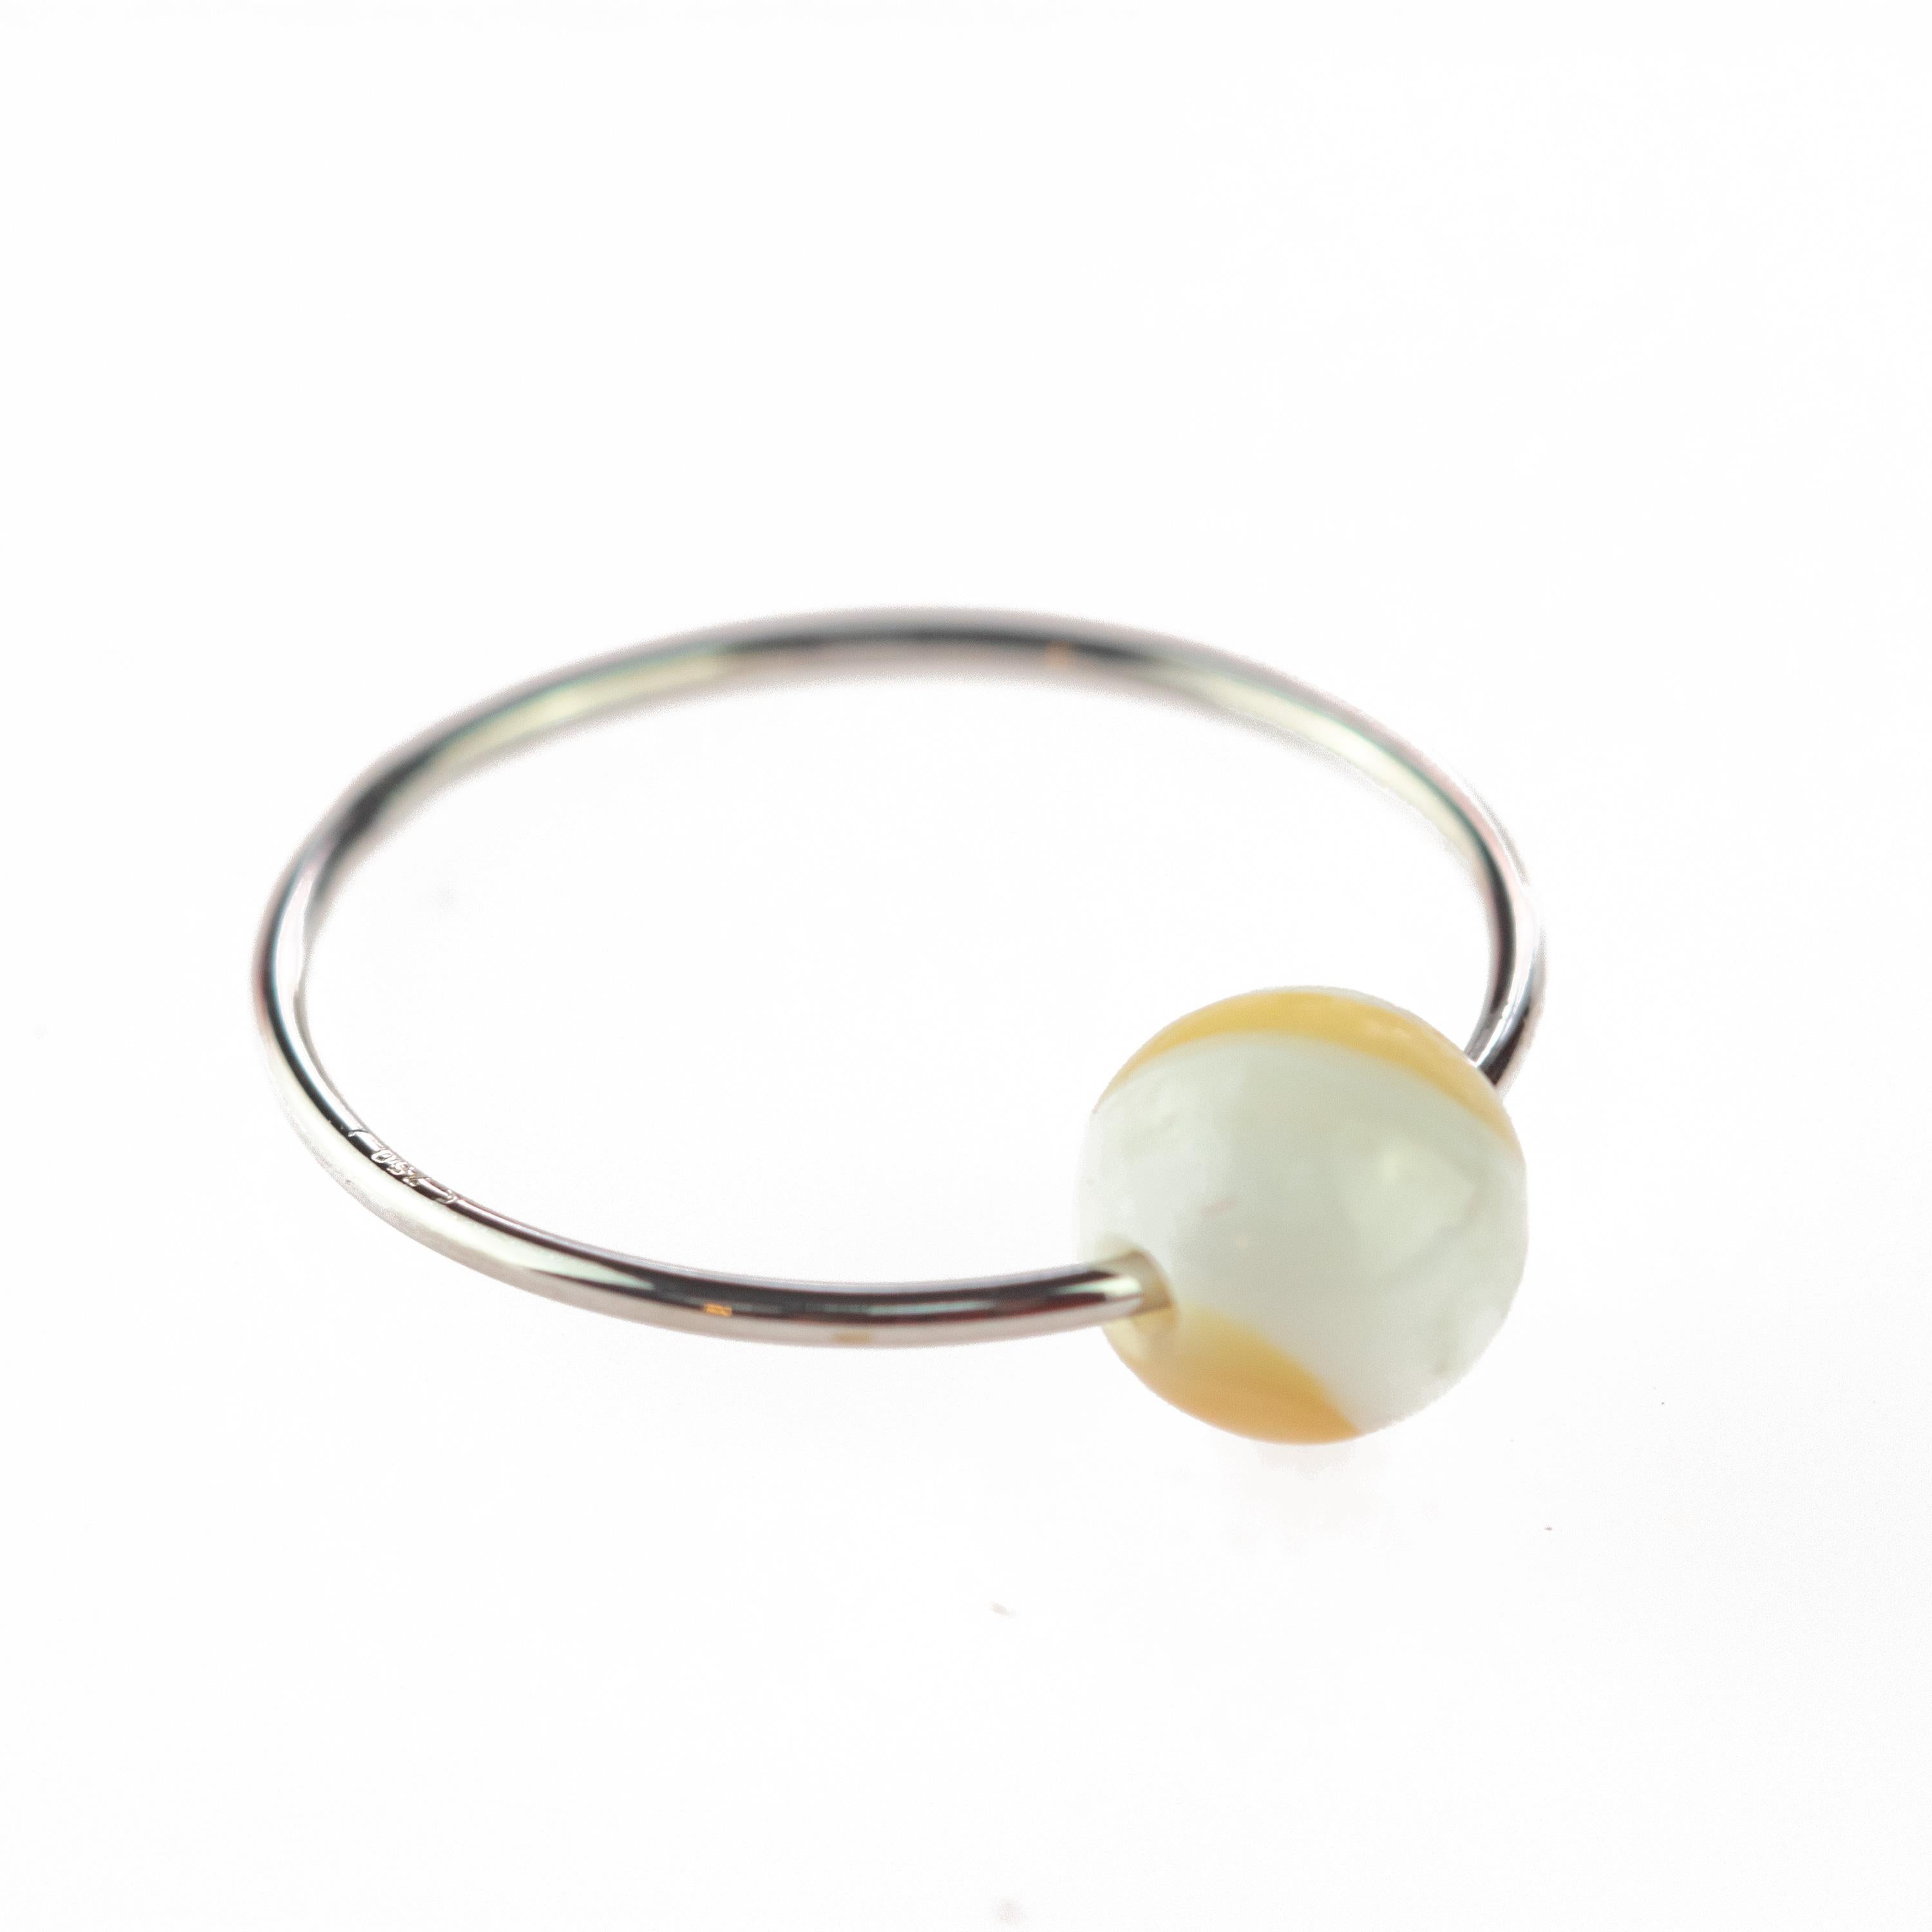 Signature INTINI Jewels Planet ring. Contemporary ring design in 18 karat white gold with a precious mother of pearl round bead.  Passion and intensity mixed in one jewel. Delight yourself with a strong, minimalist design, just for a stunning chic